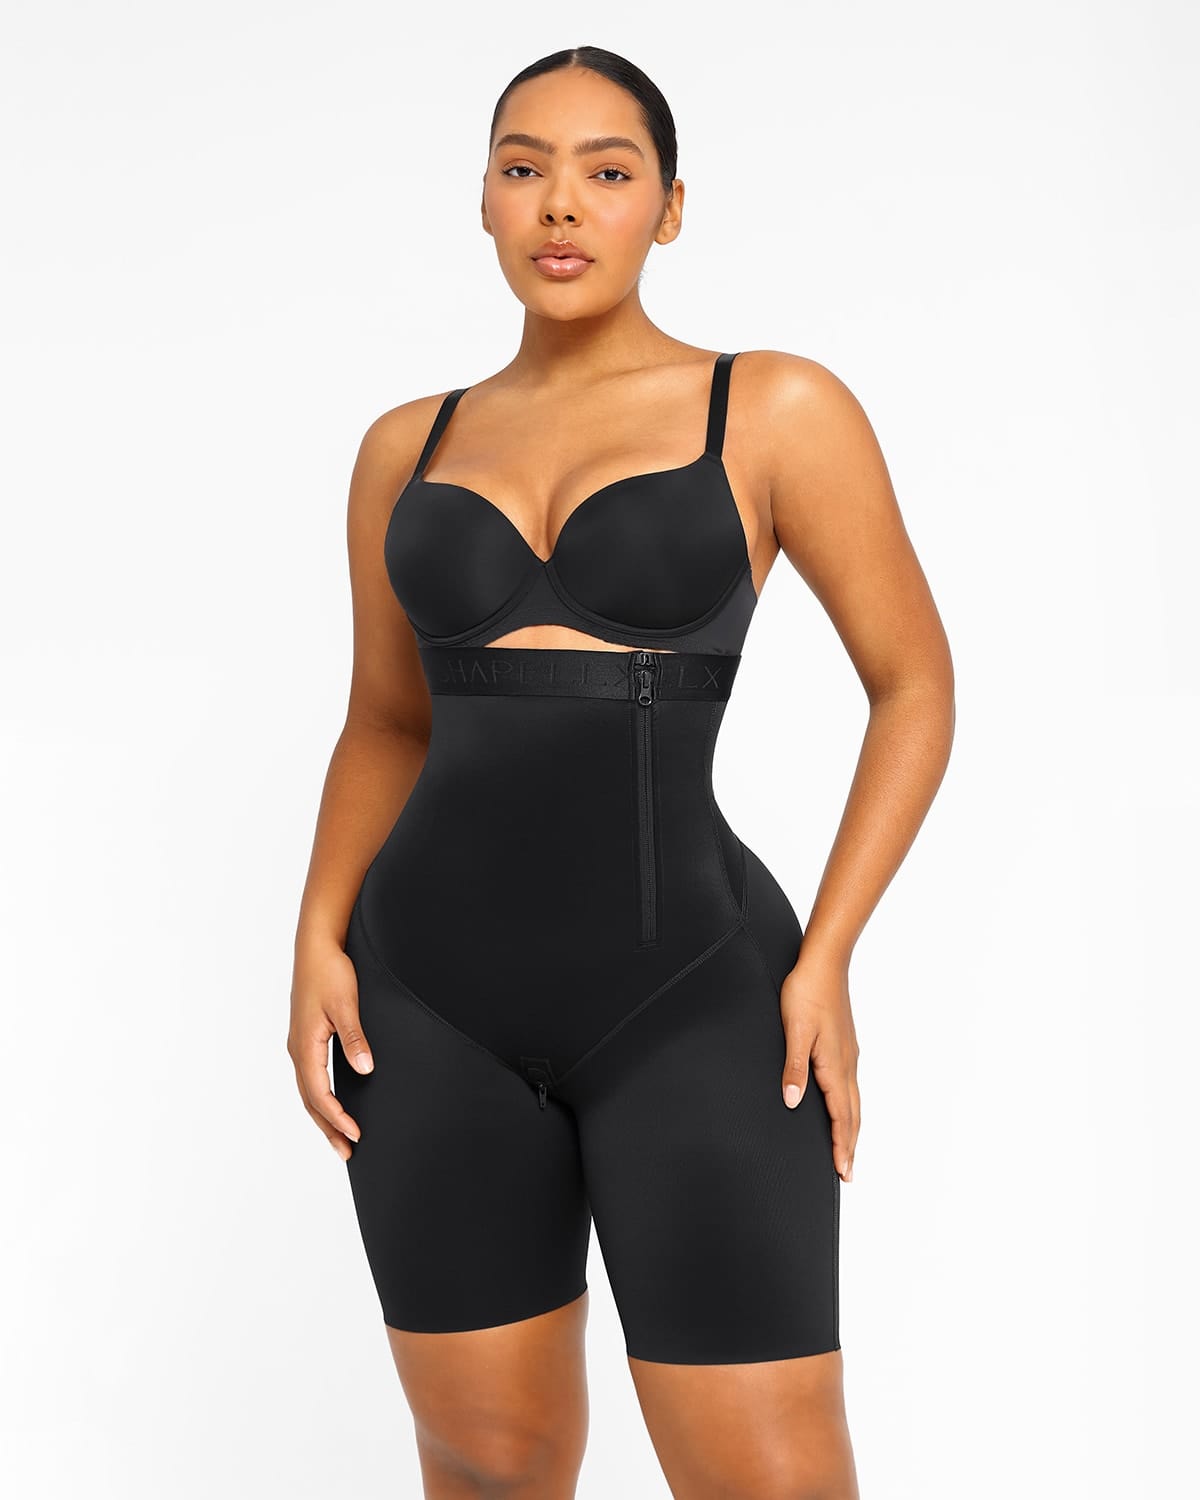 Shop Nehla High Waisted Body Shaper Tummy Control Short, Pack of